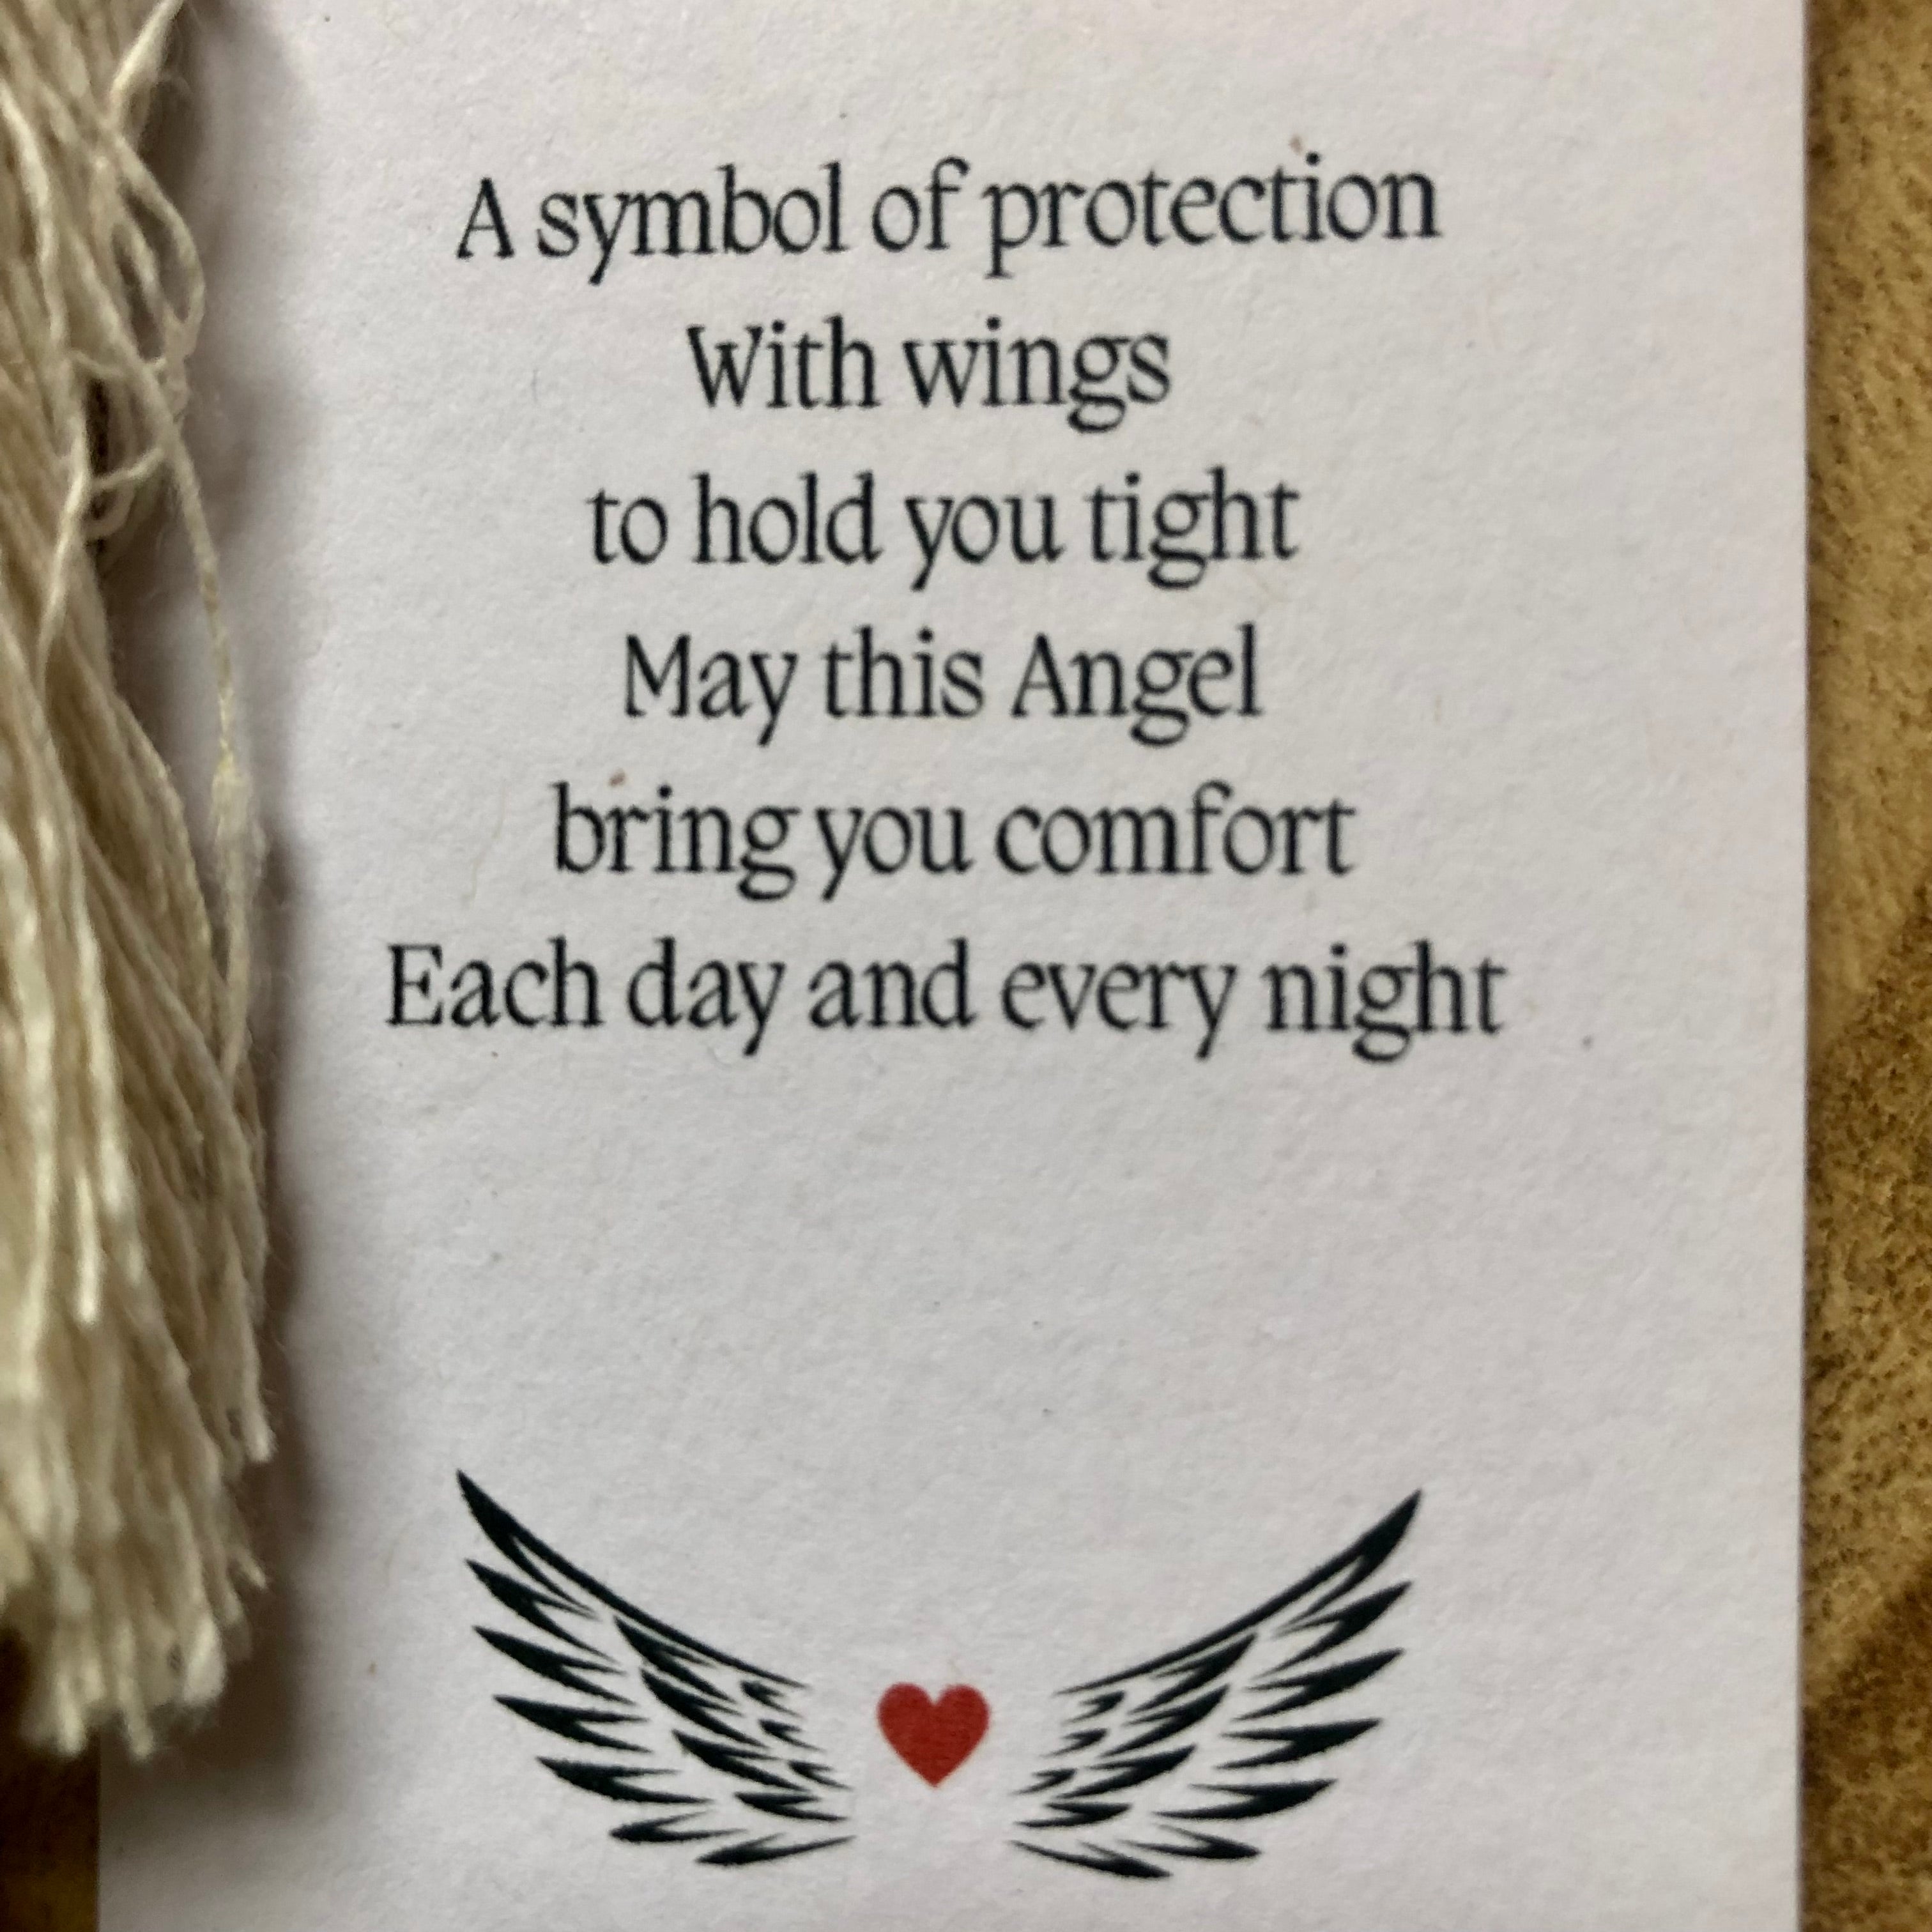 Poem of protection for Angels